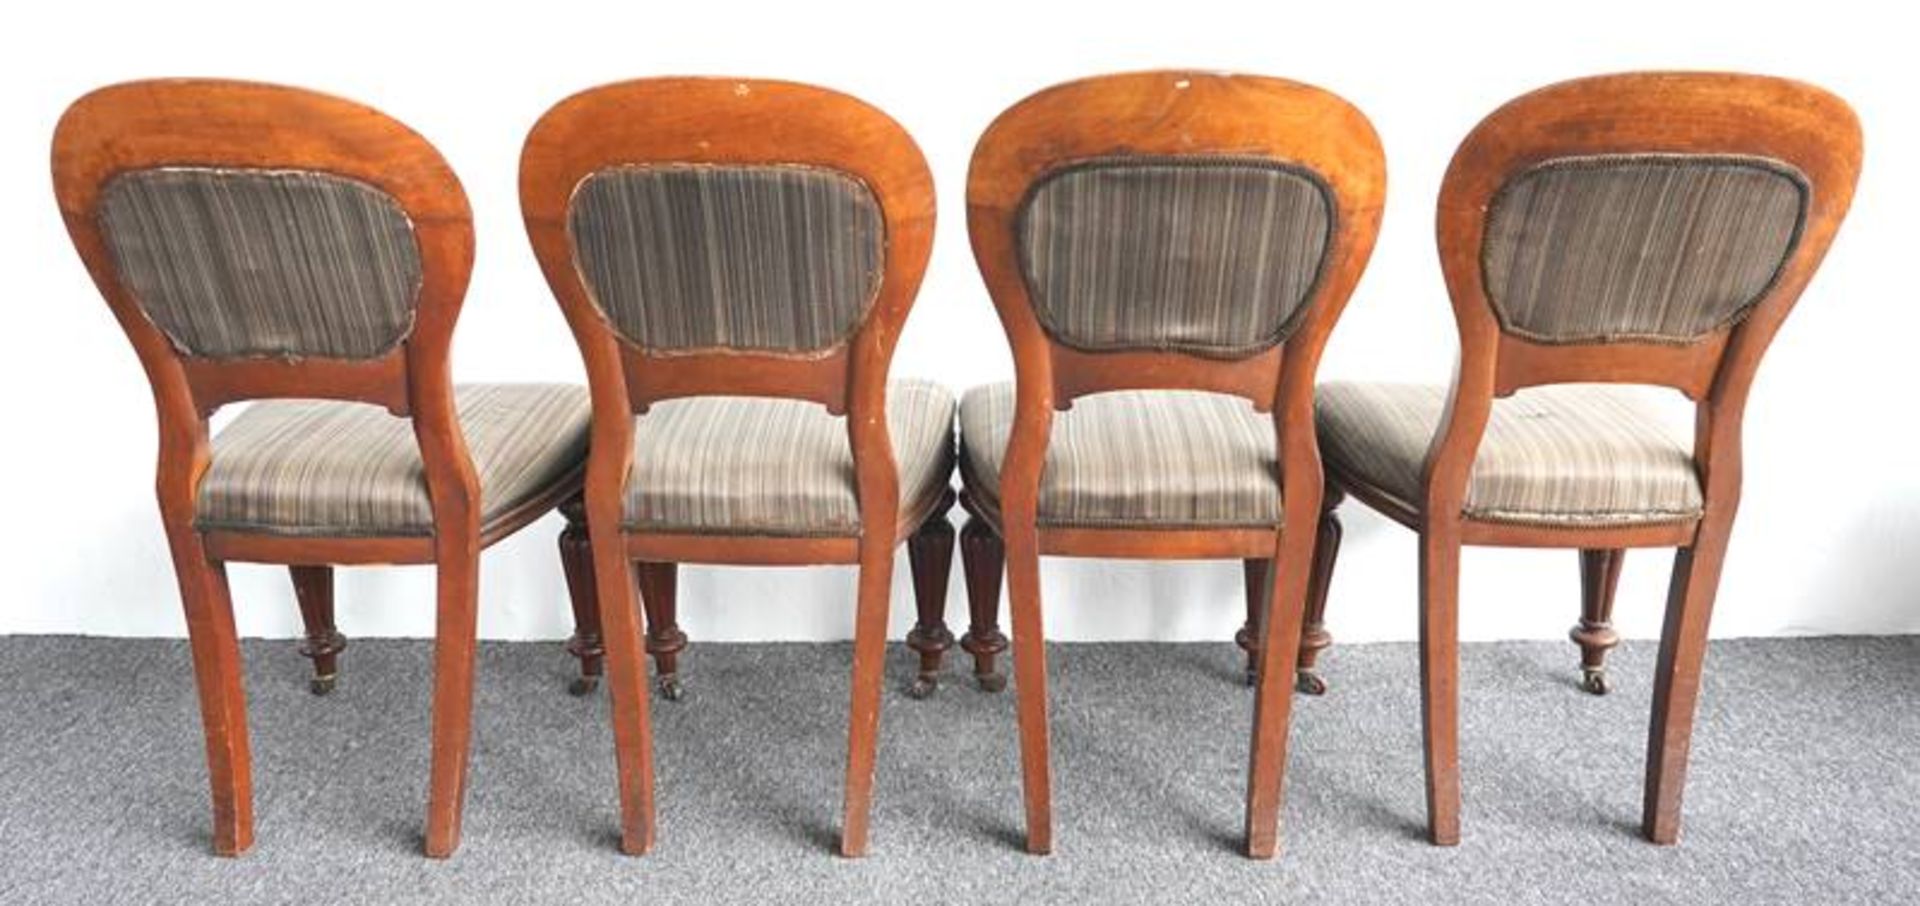 7 Louis Philippe chairs - Image 4 of 6